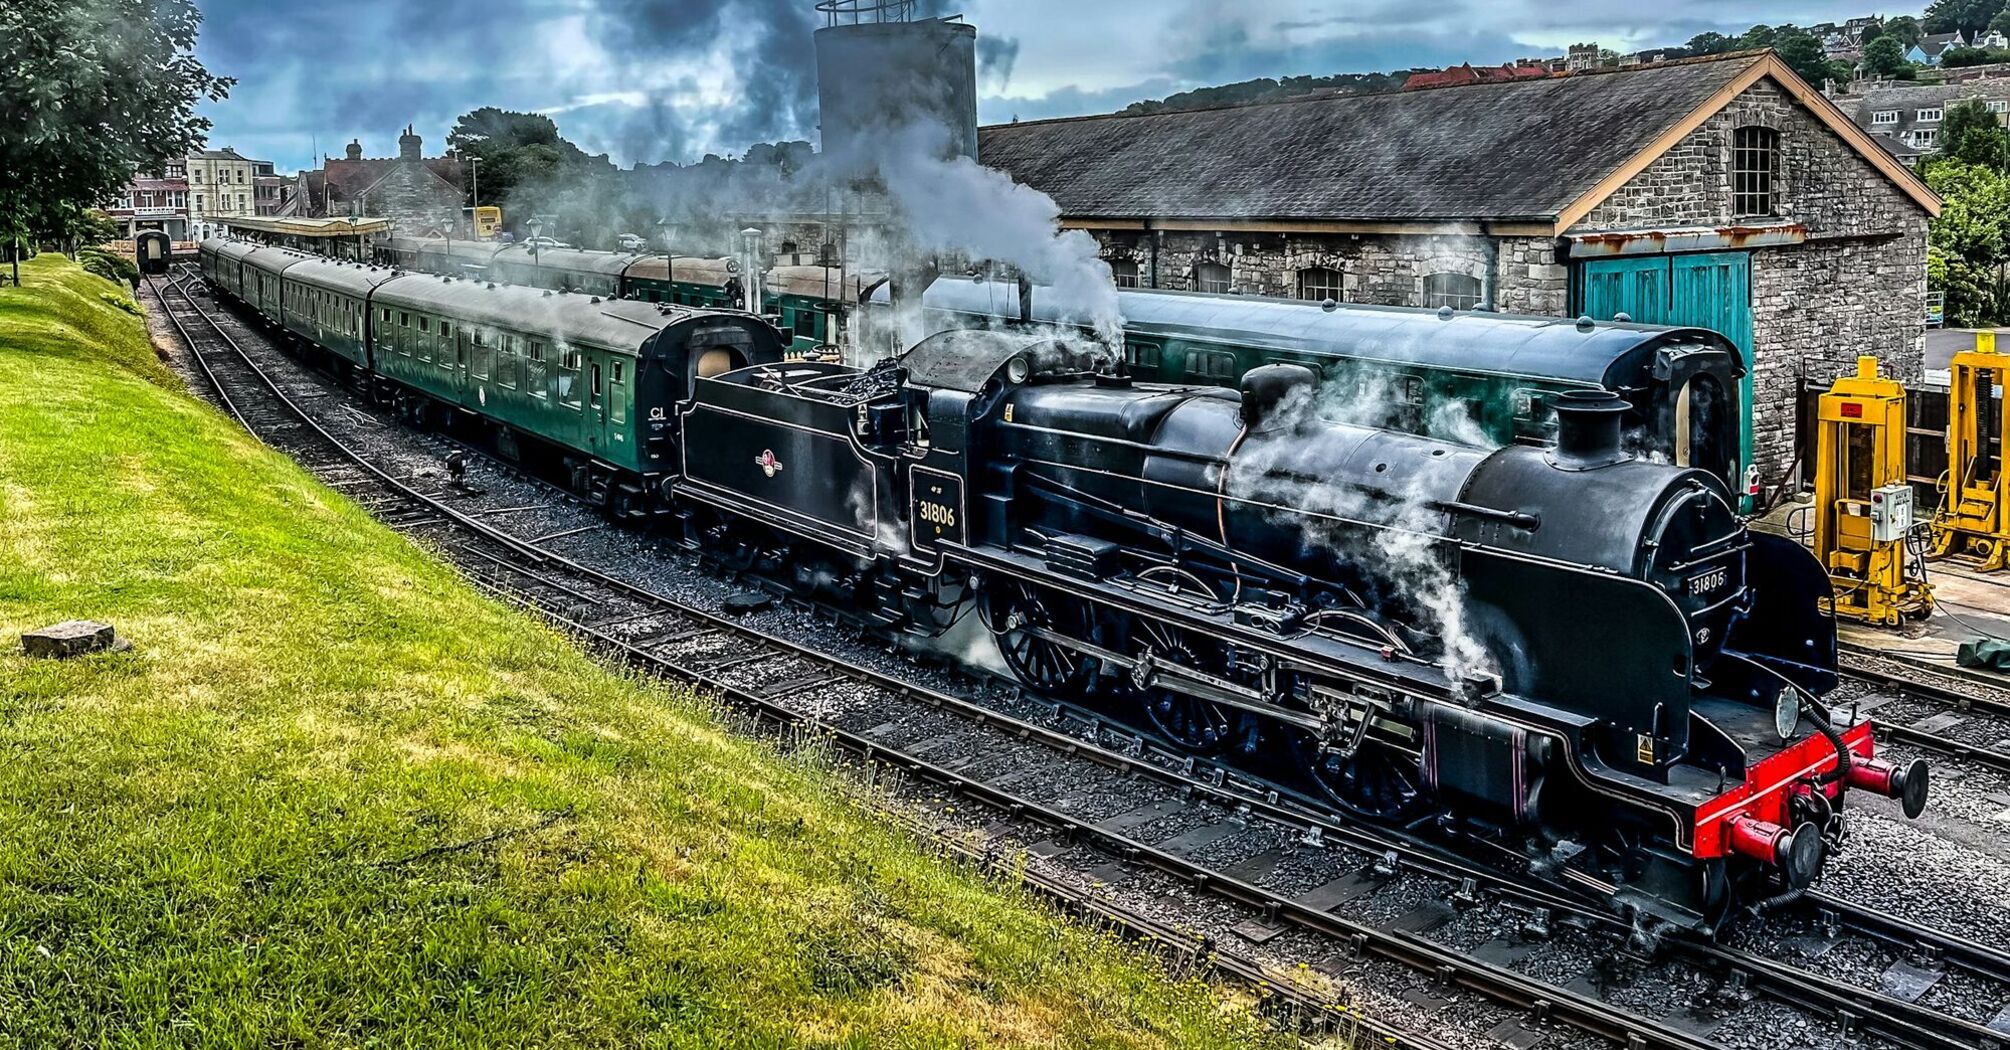 A steam train on tracks in Swanage